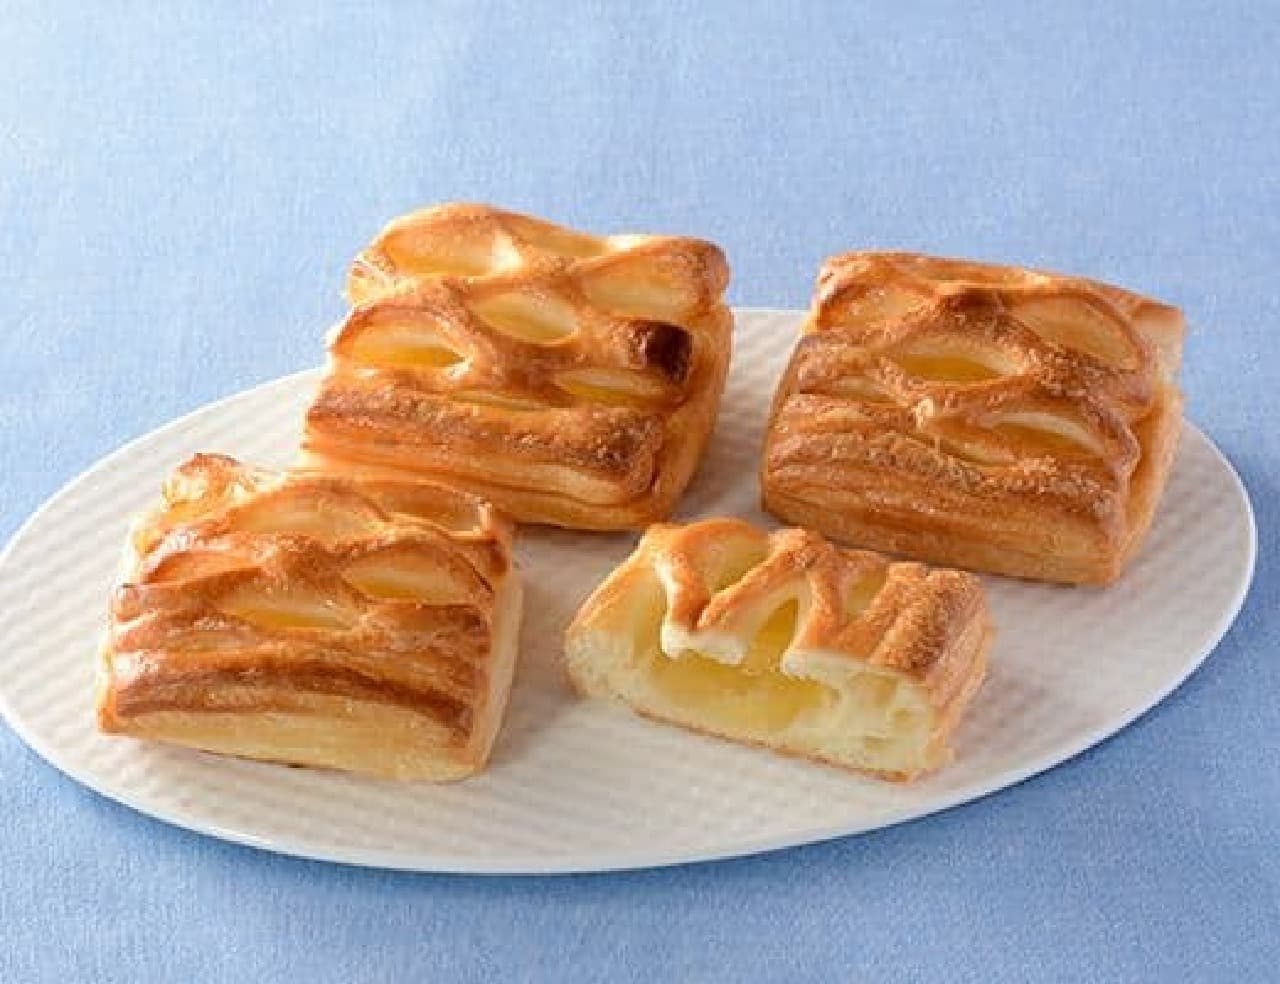 LAWSON "Danish with apple cubes, 4 pieces